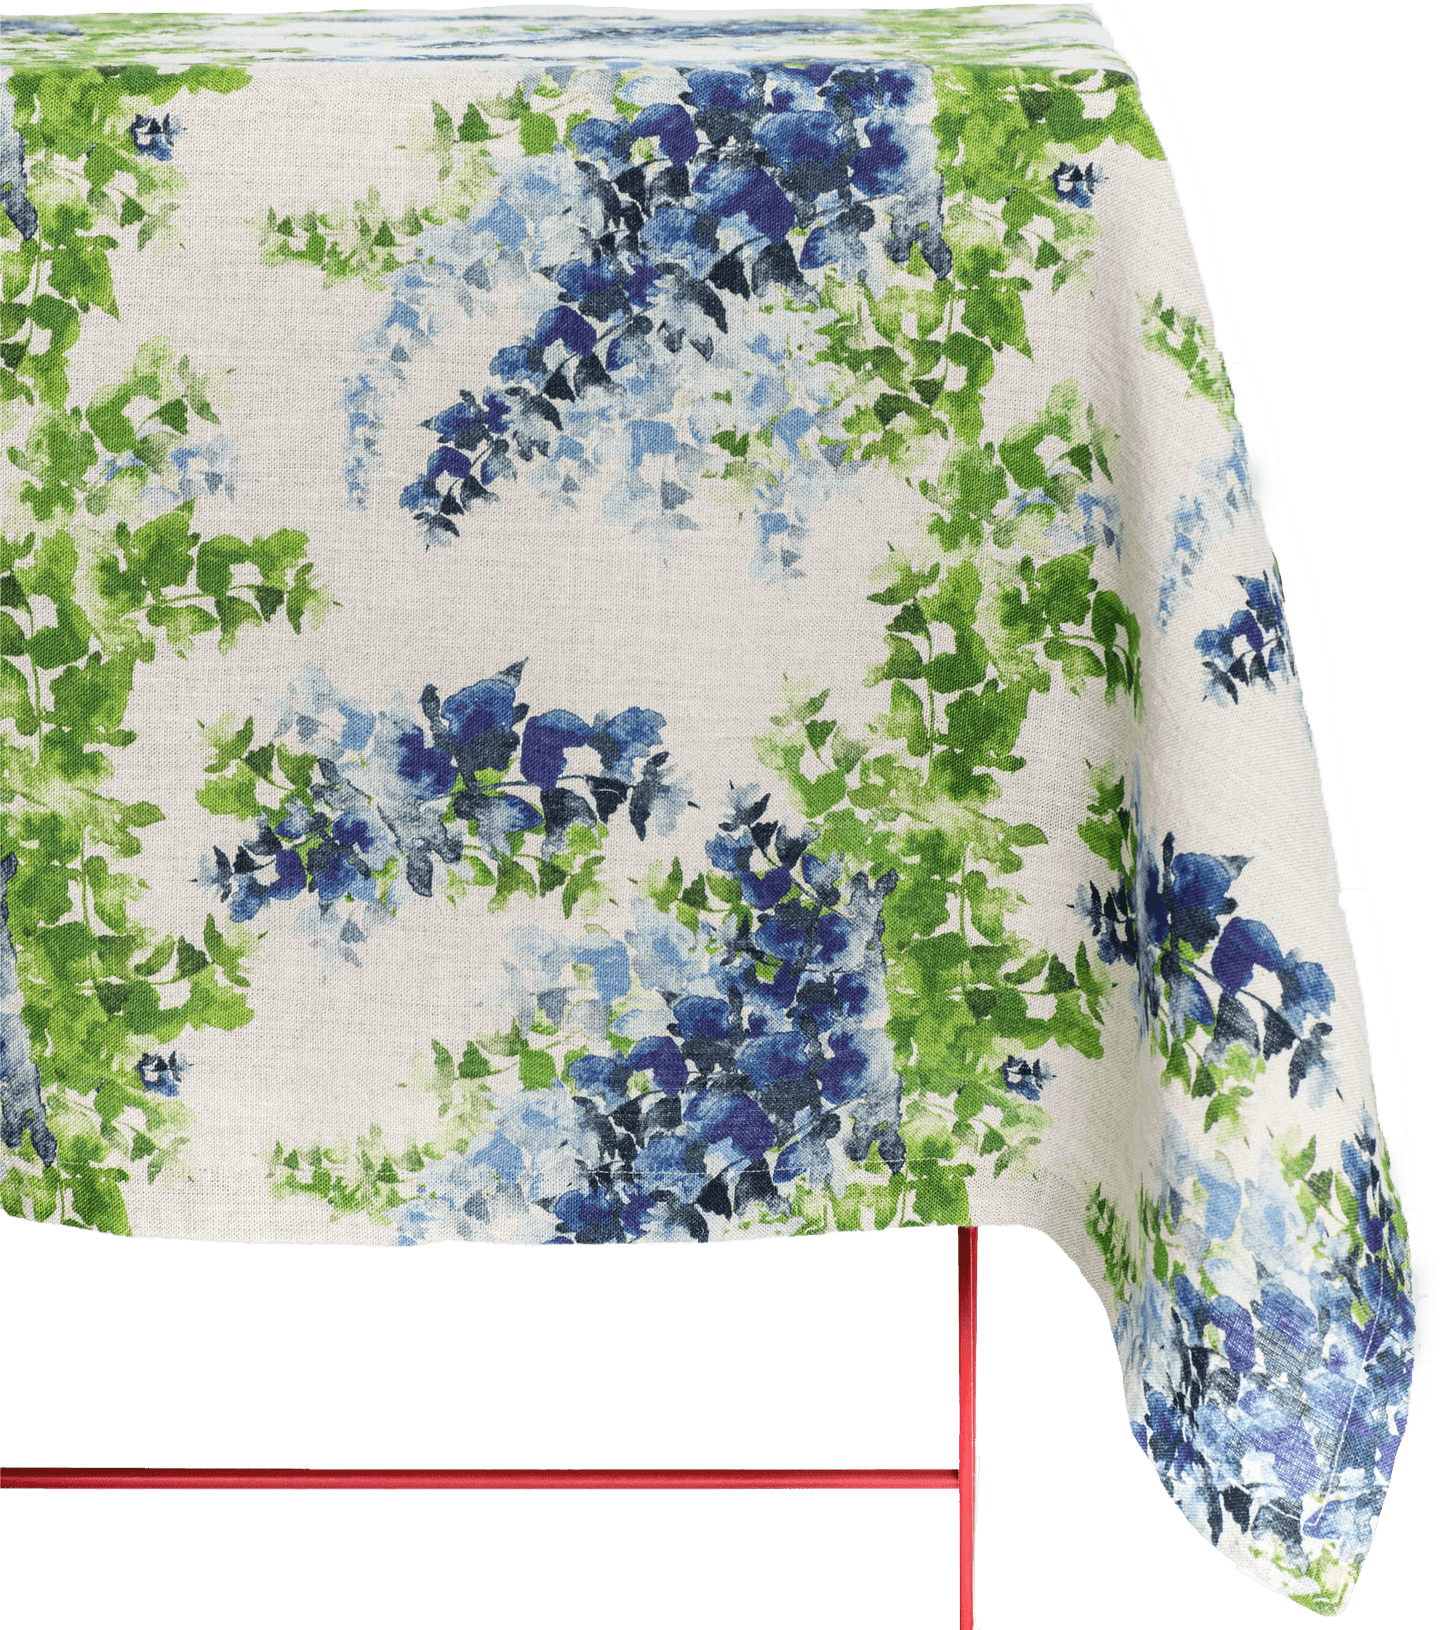 Organic Linen Tablecloth in Blue and Green Wisteria Print - Sophie Williamson Design